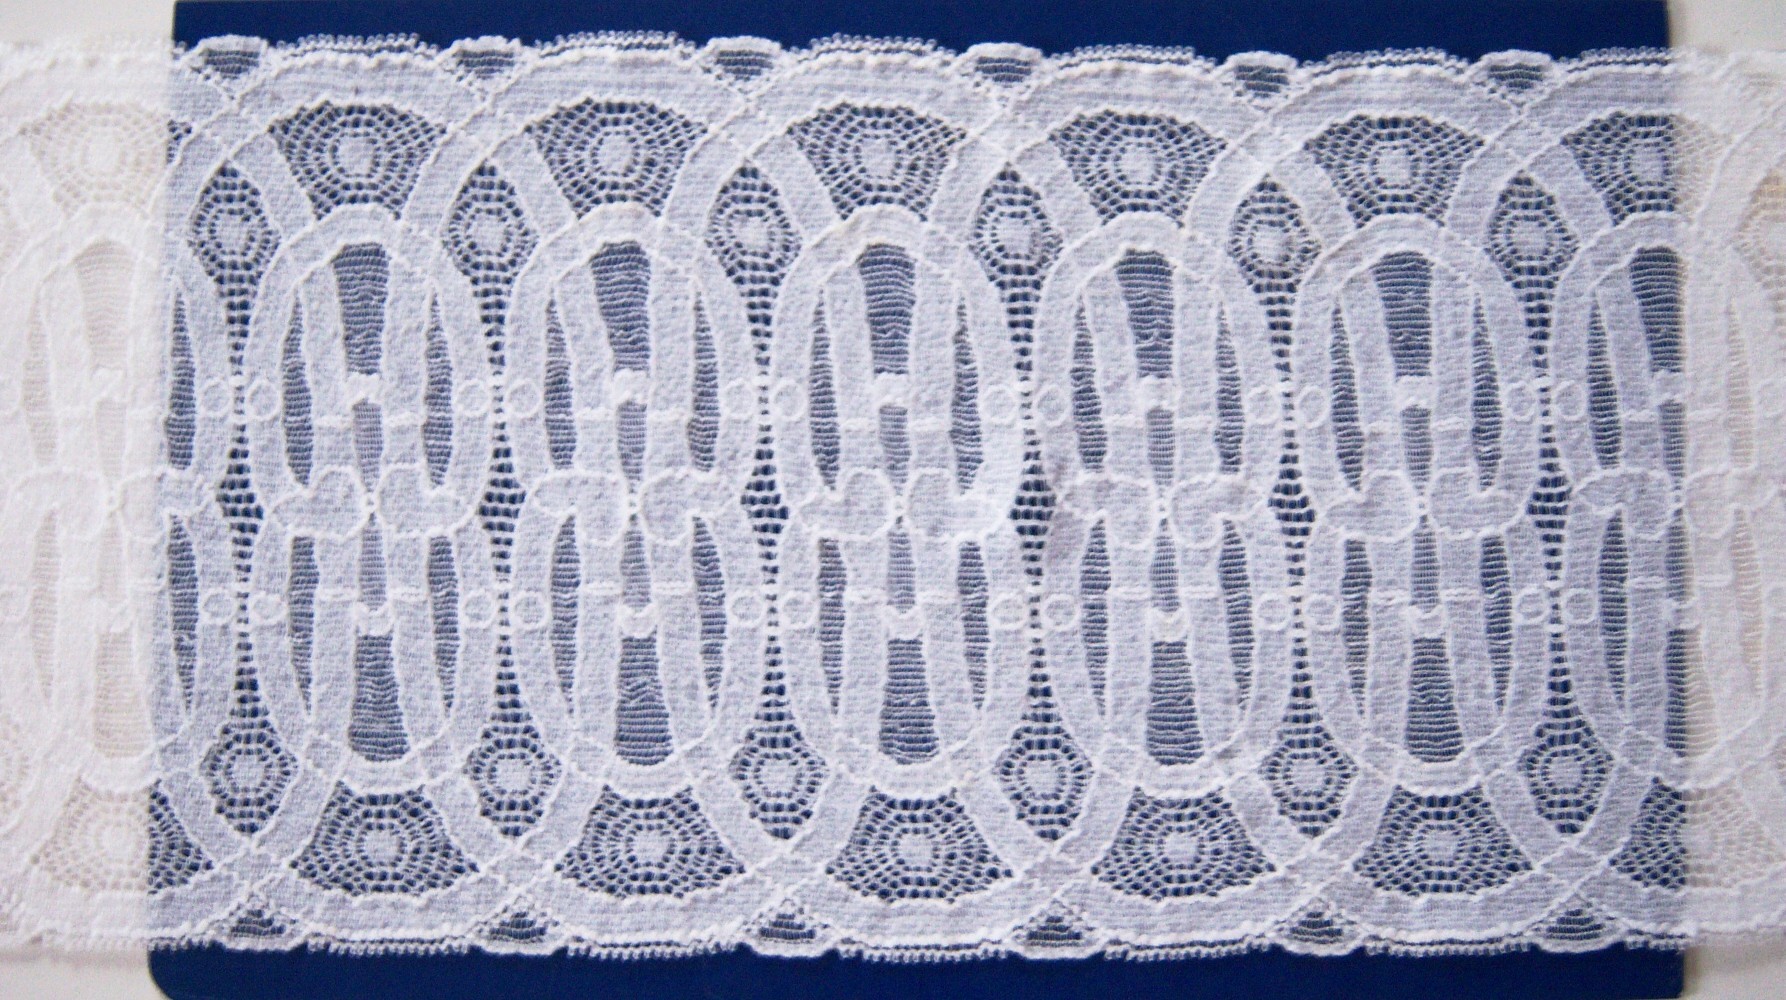 Star White 5 1/2" Stretch Lace